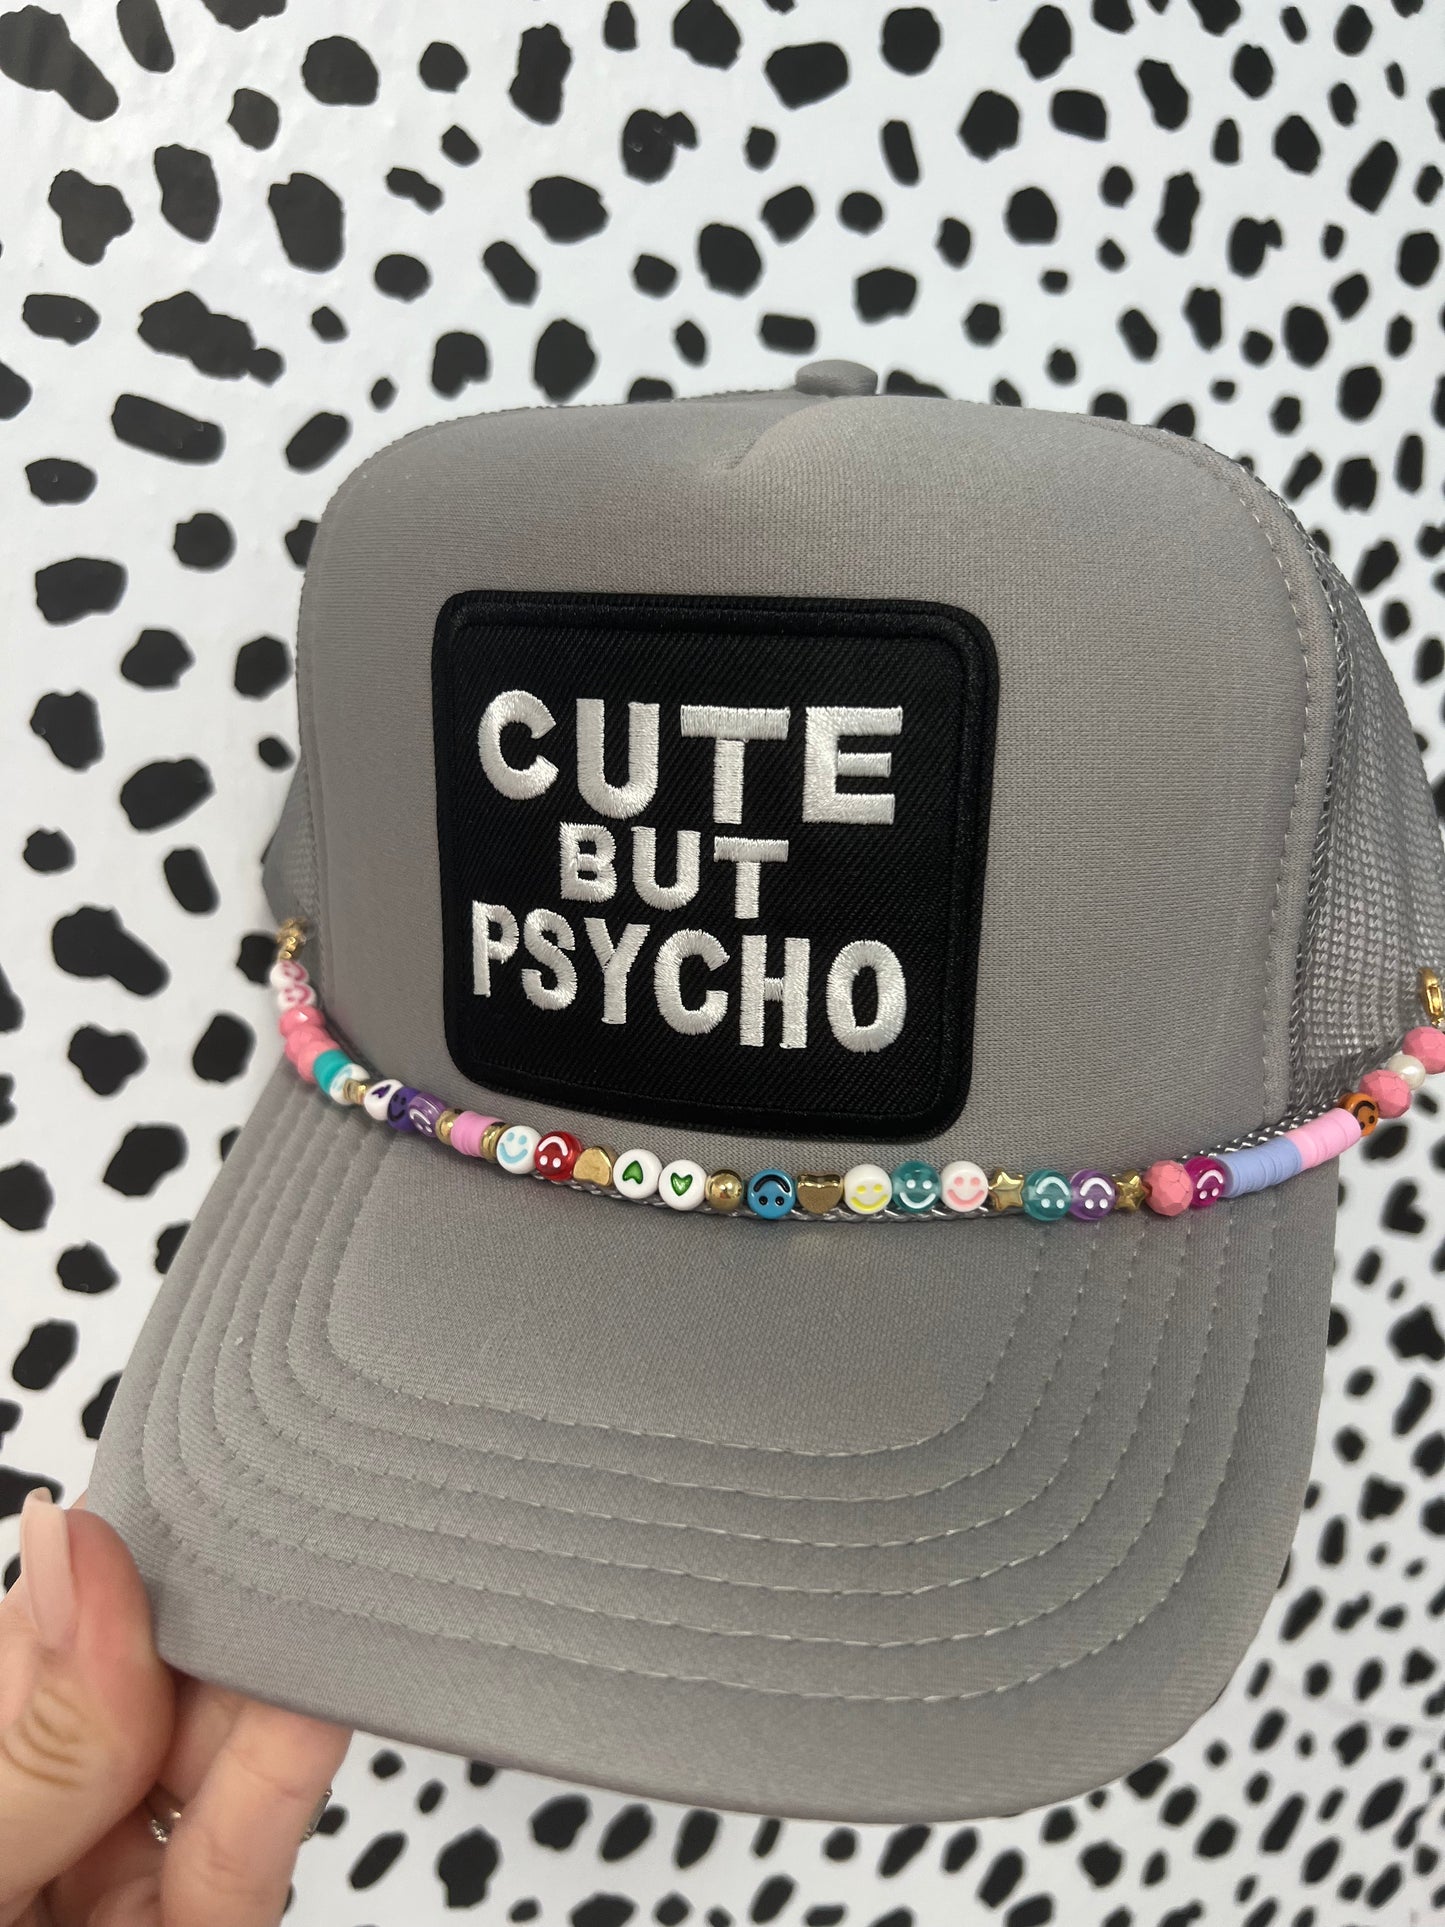 Cute but psycho trucker hat with hat charm